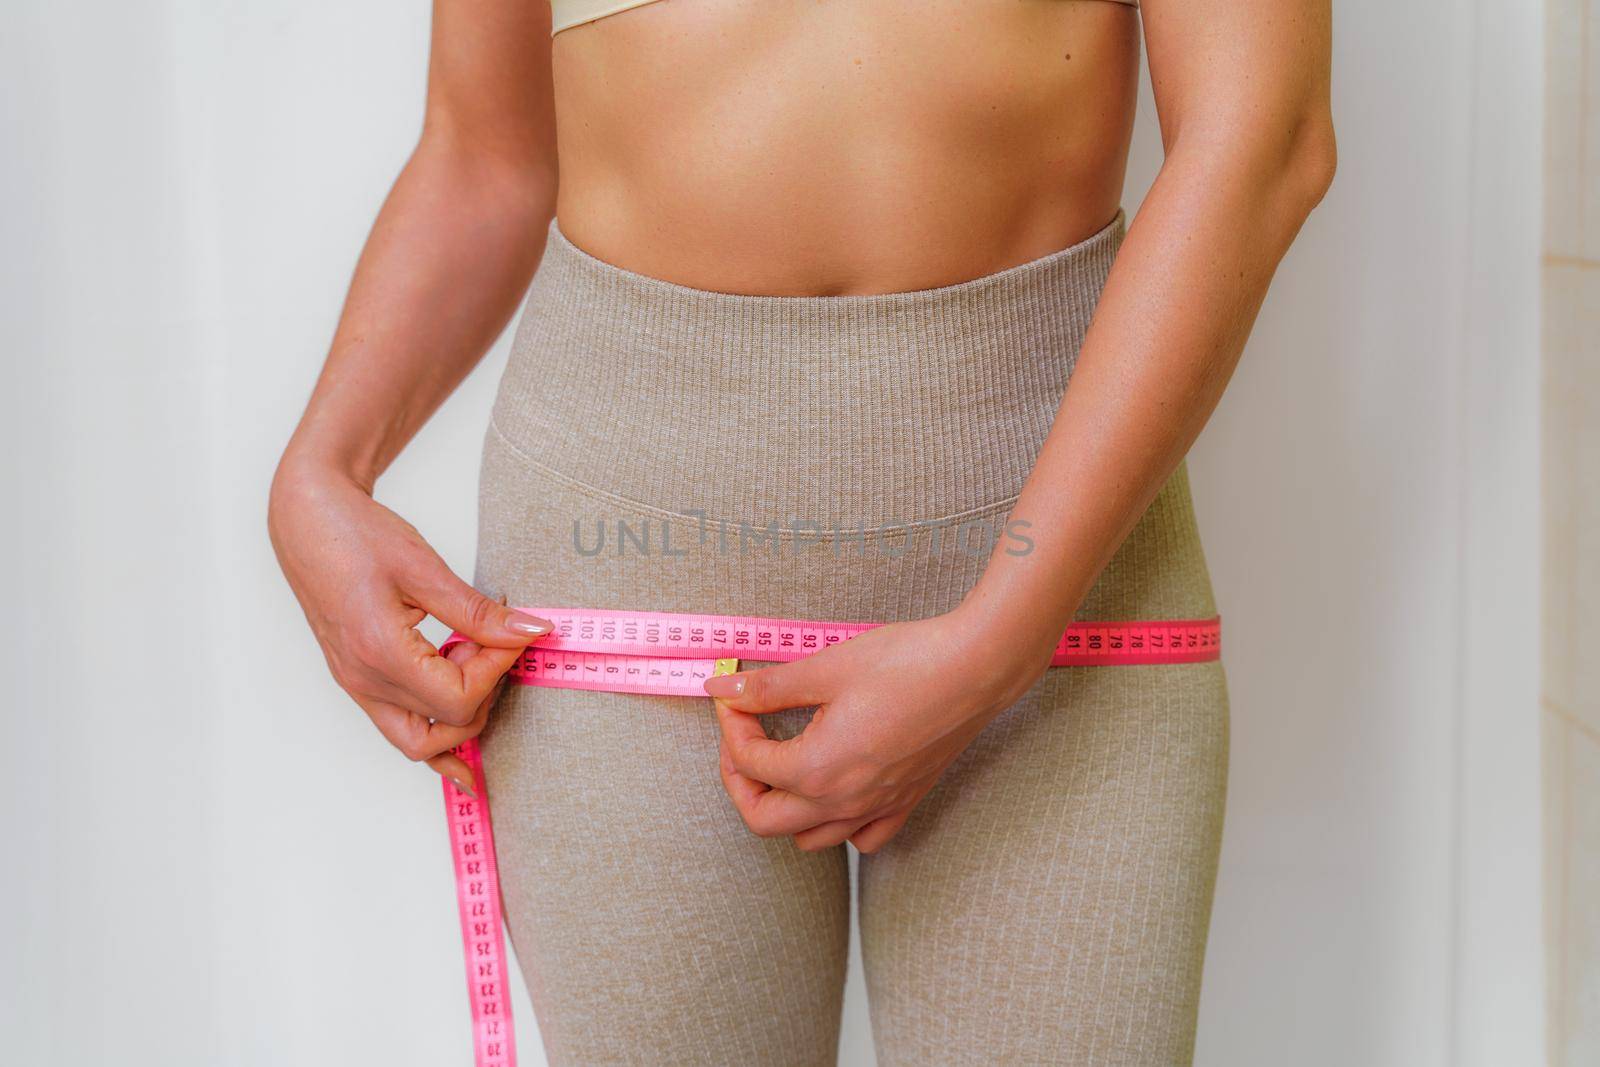 Cropped view of slim woman measuring hips with tape measure at home, close up. An unrecognizable European woman checks the result of a weight loss diet or liposuction indoors. Healthy lifestyle